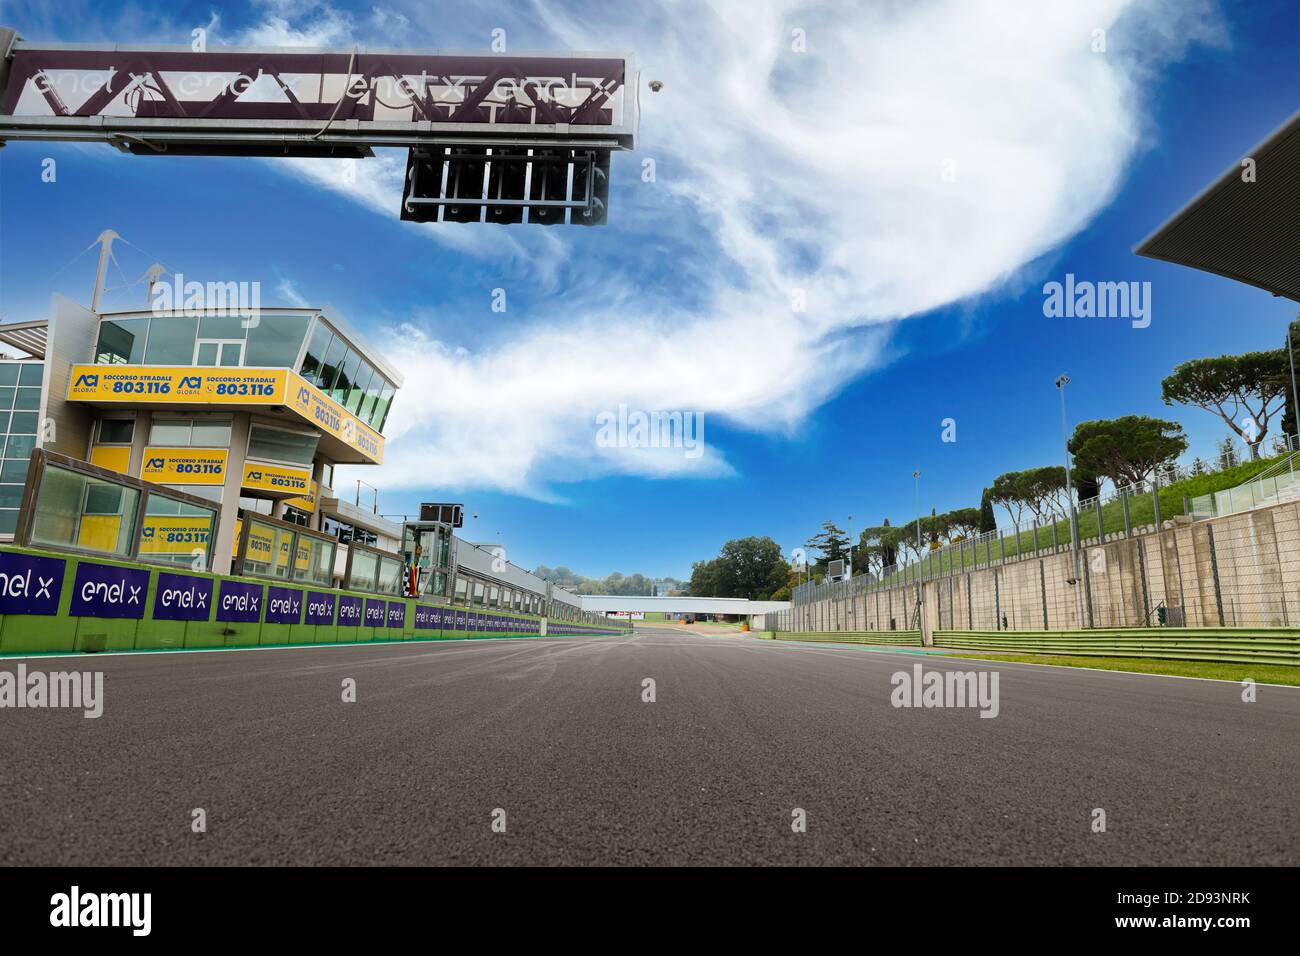 Vallelunga, Italy, 23 october 2020. Motor sport circuit asphalt empty front view low angle view from track center and start light Stock Photo